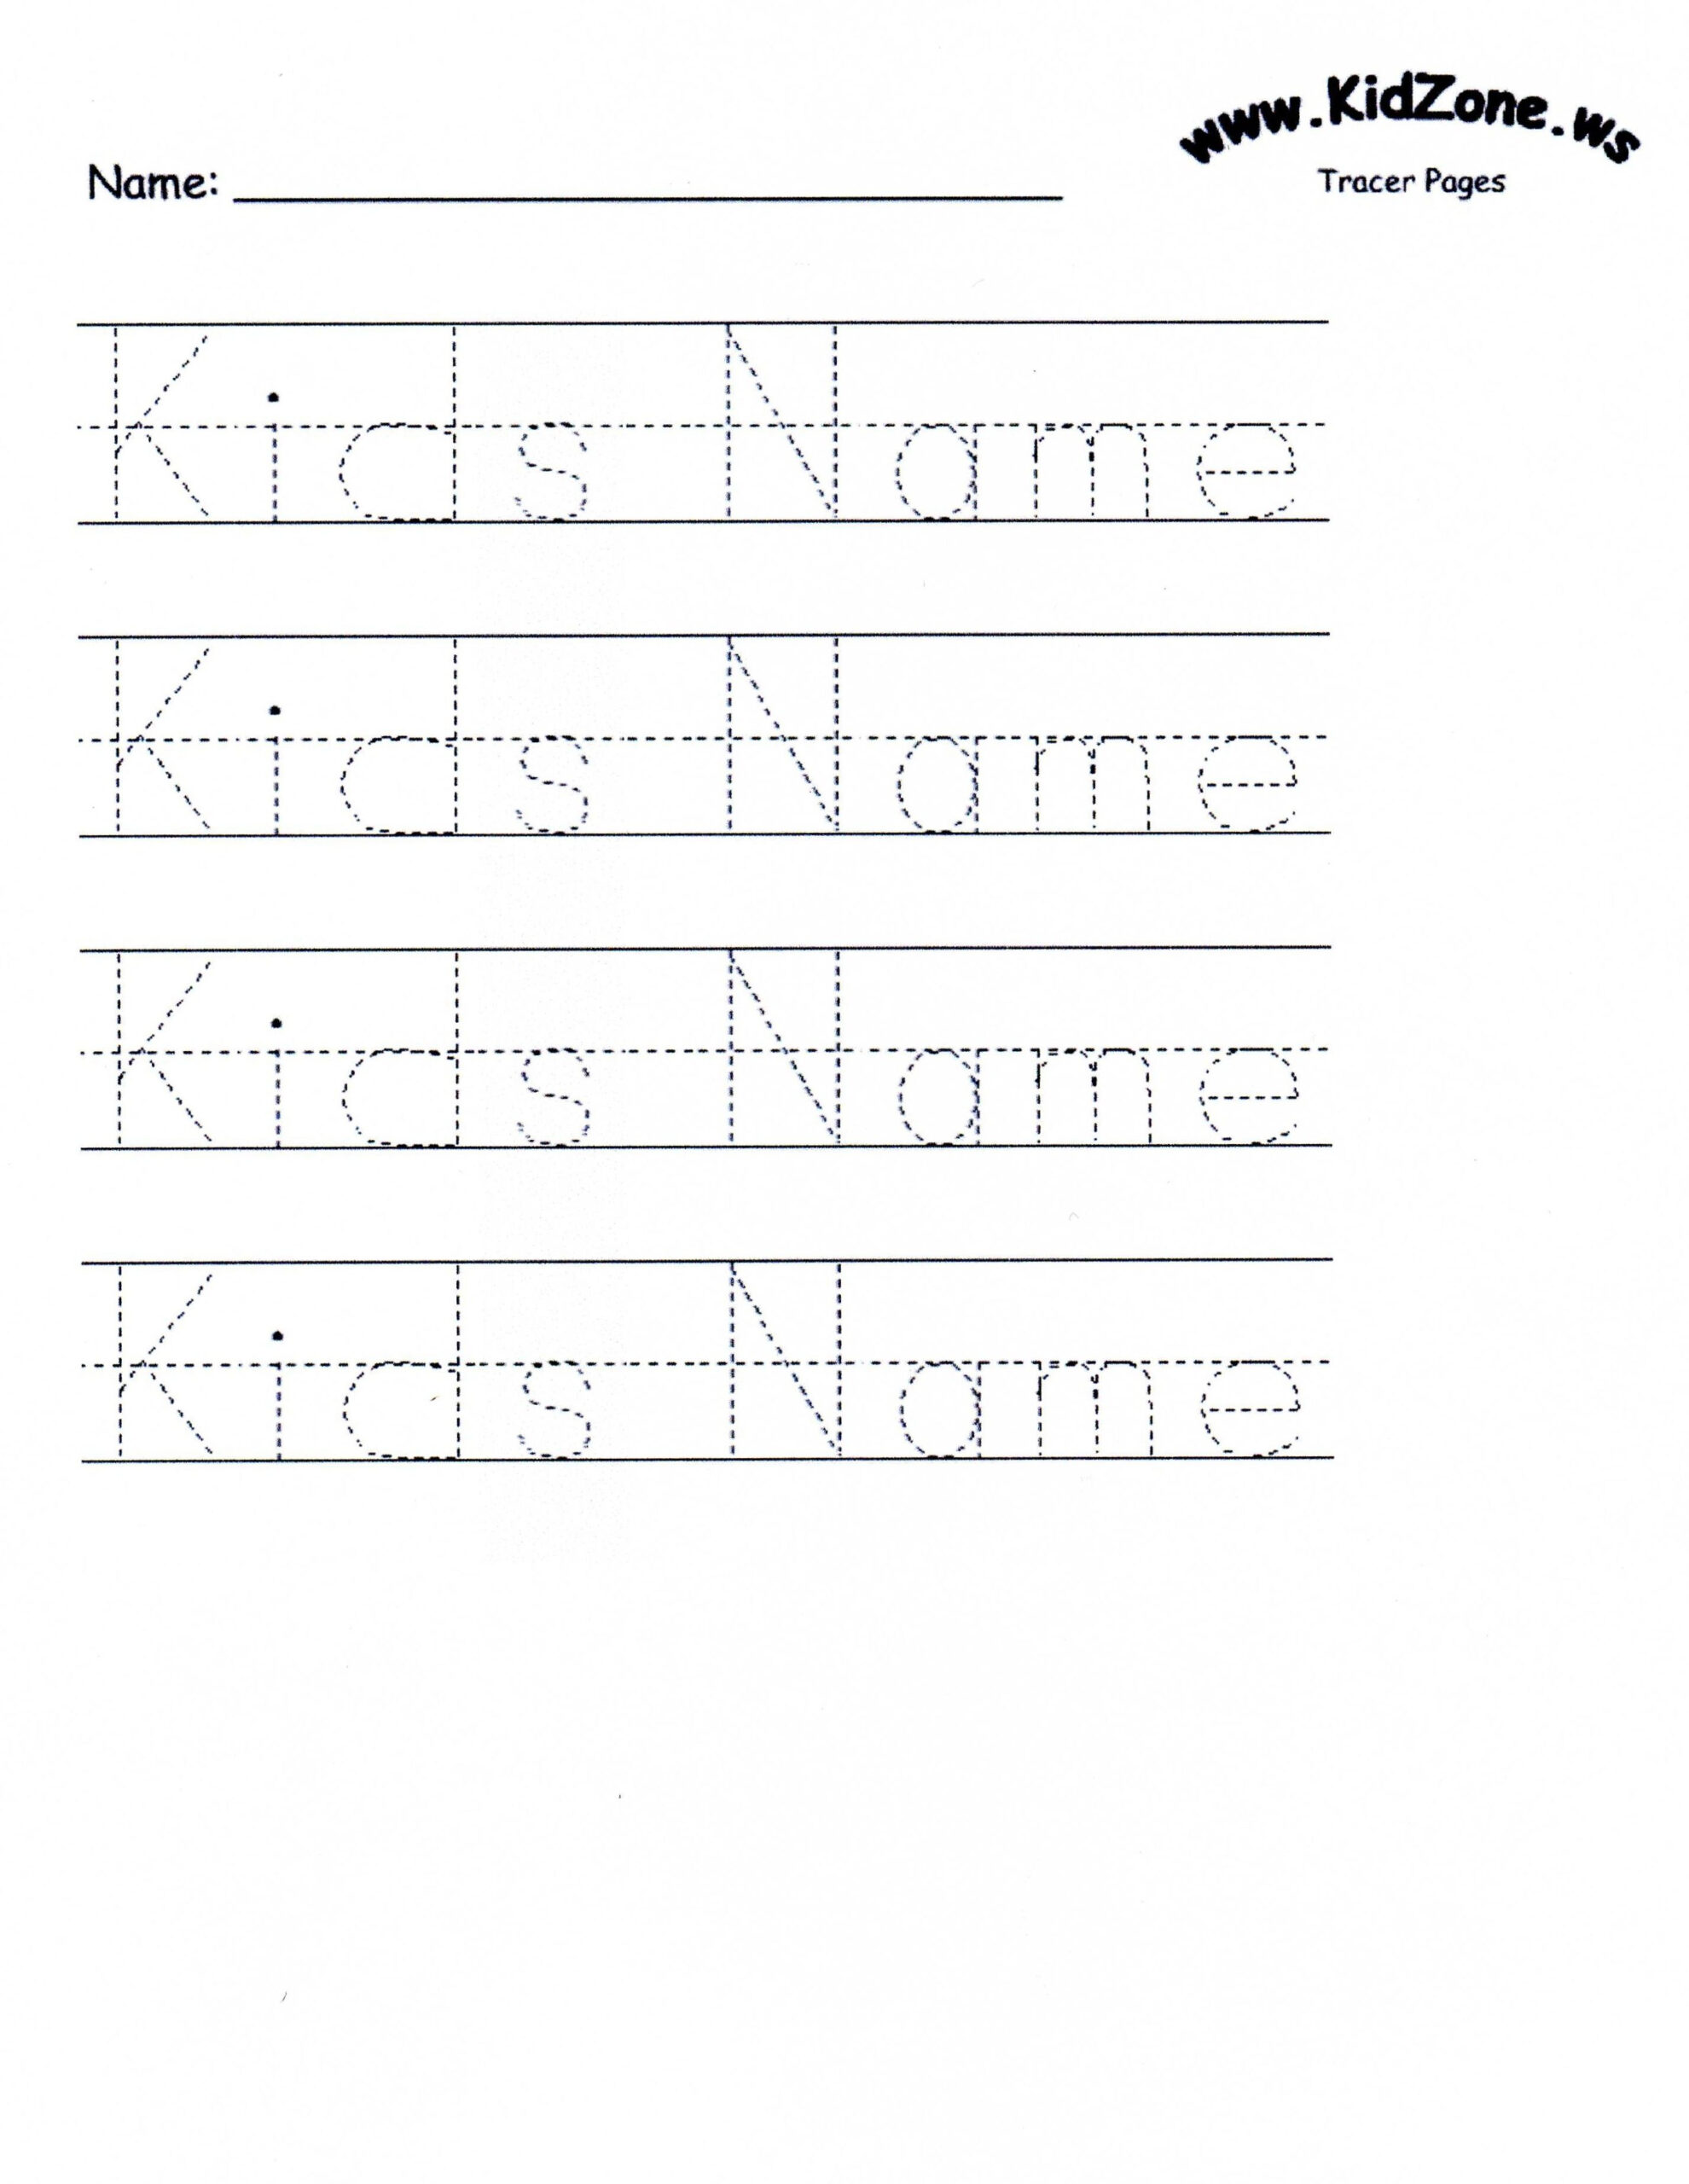 Custom Tracer Pages | Tracing Worksheets Preschool, Name in Name Tracing Worksheets Kidzone